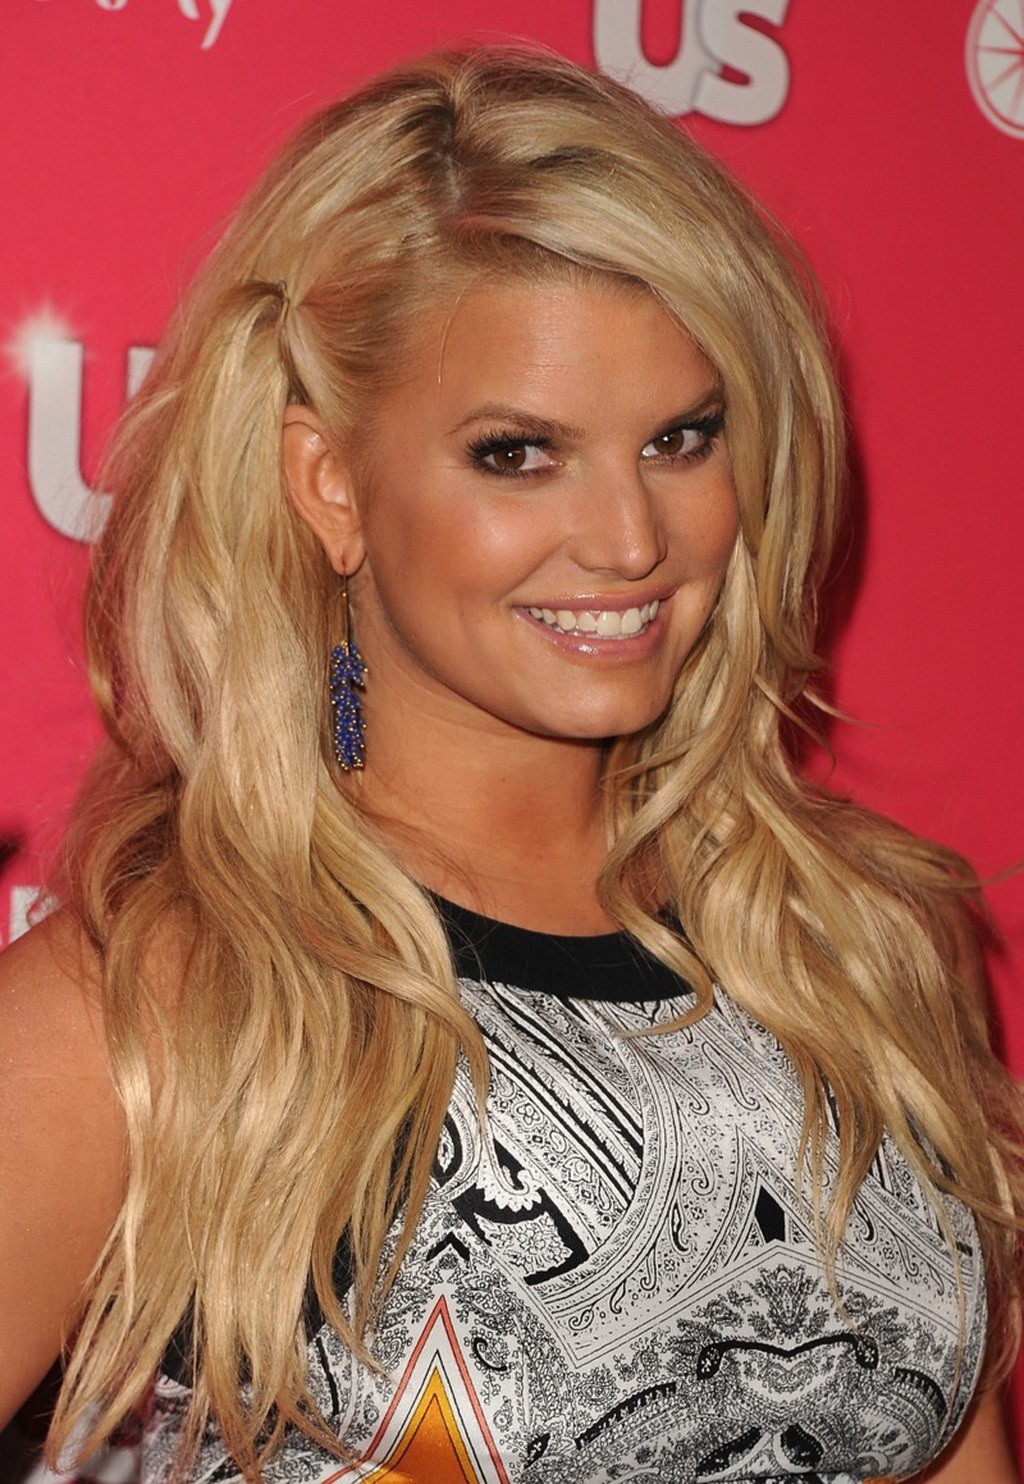 Jessica simpson leggy lingua-teasing all'us weekly's hot hollywood party
 #75306831